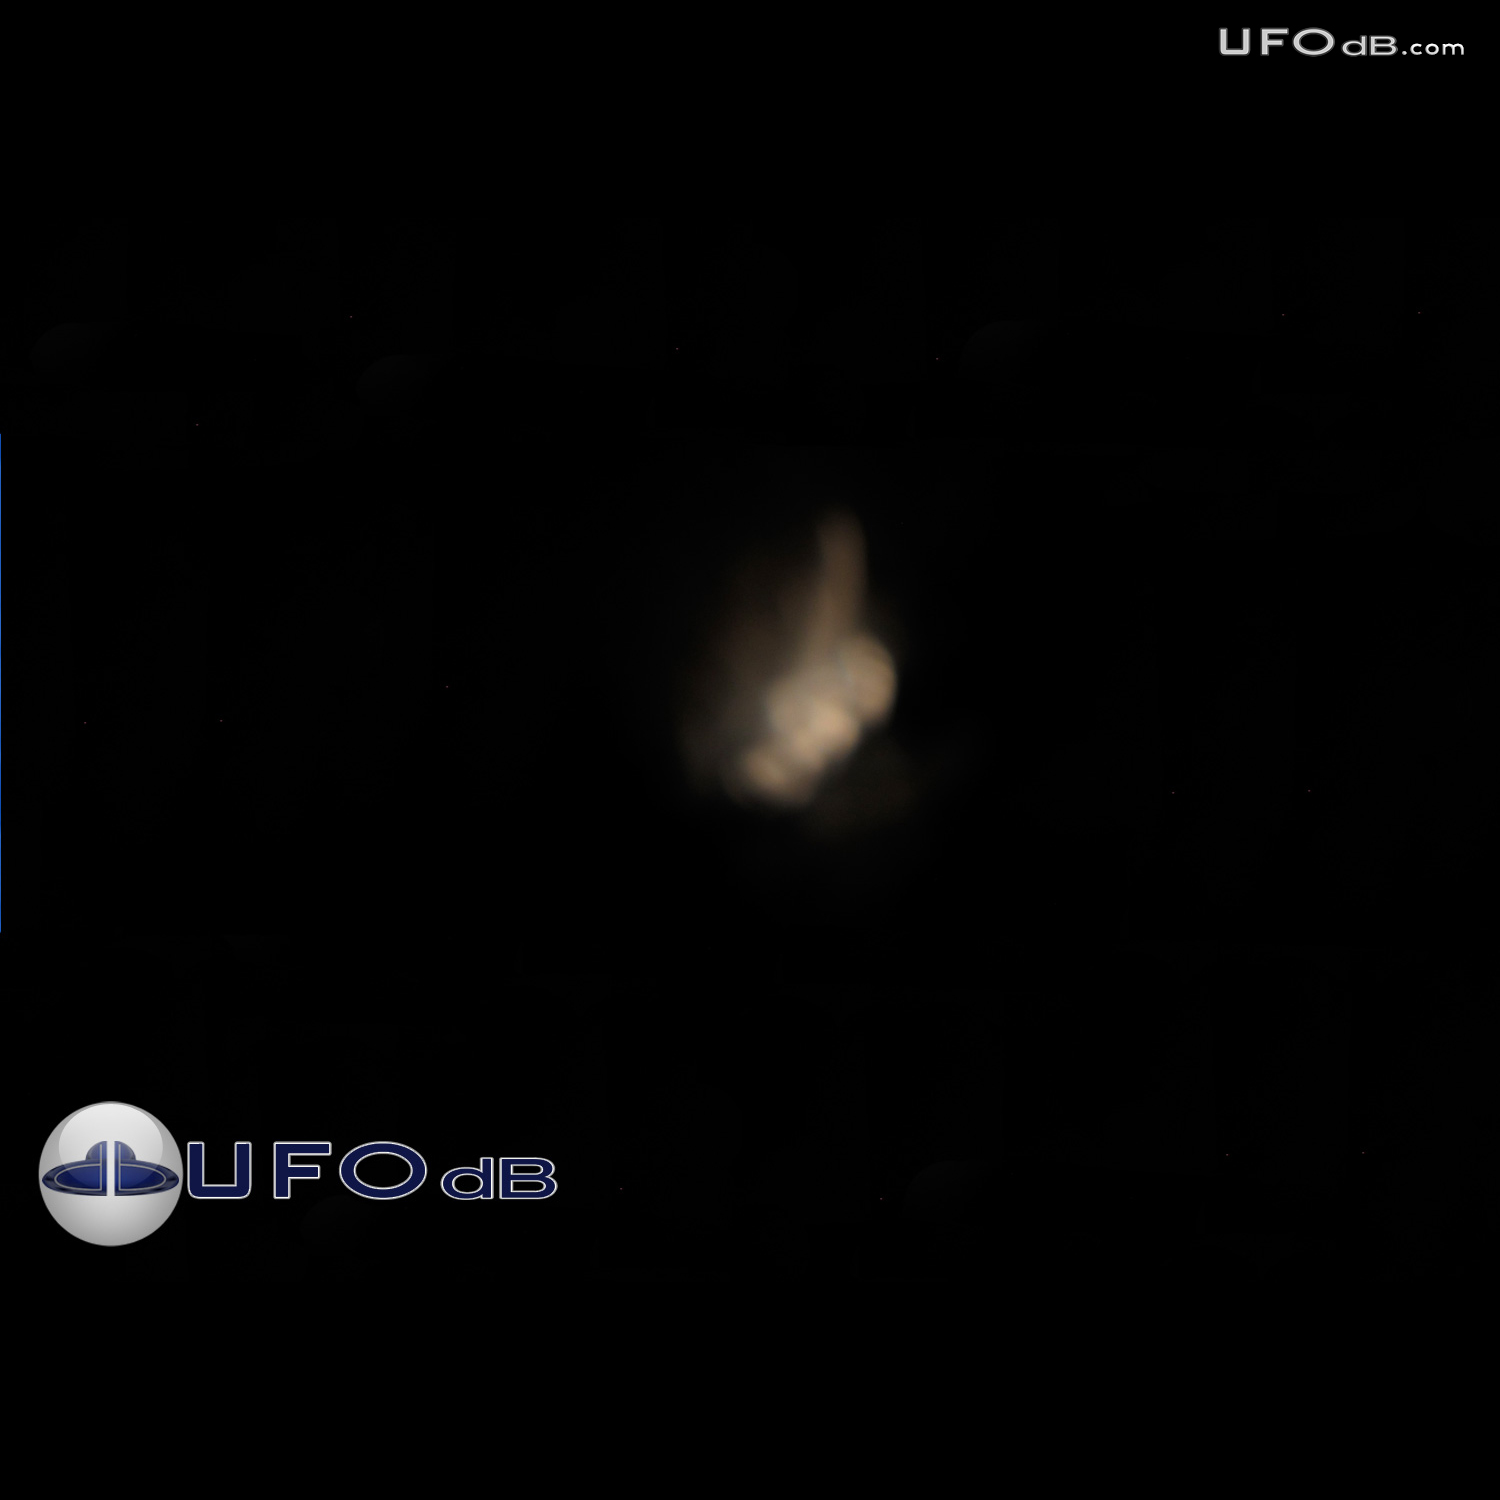 Pine Creek Campers see two UFOs on same night | Colorado | May 8 2011 UFO Picture #294-1